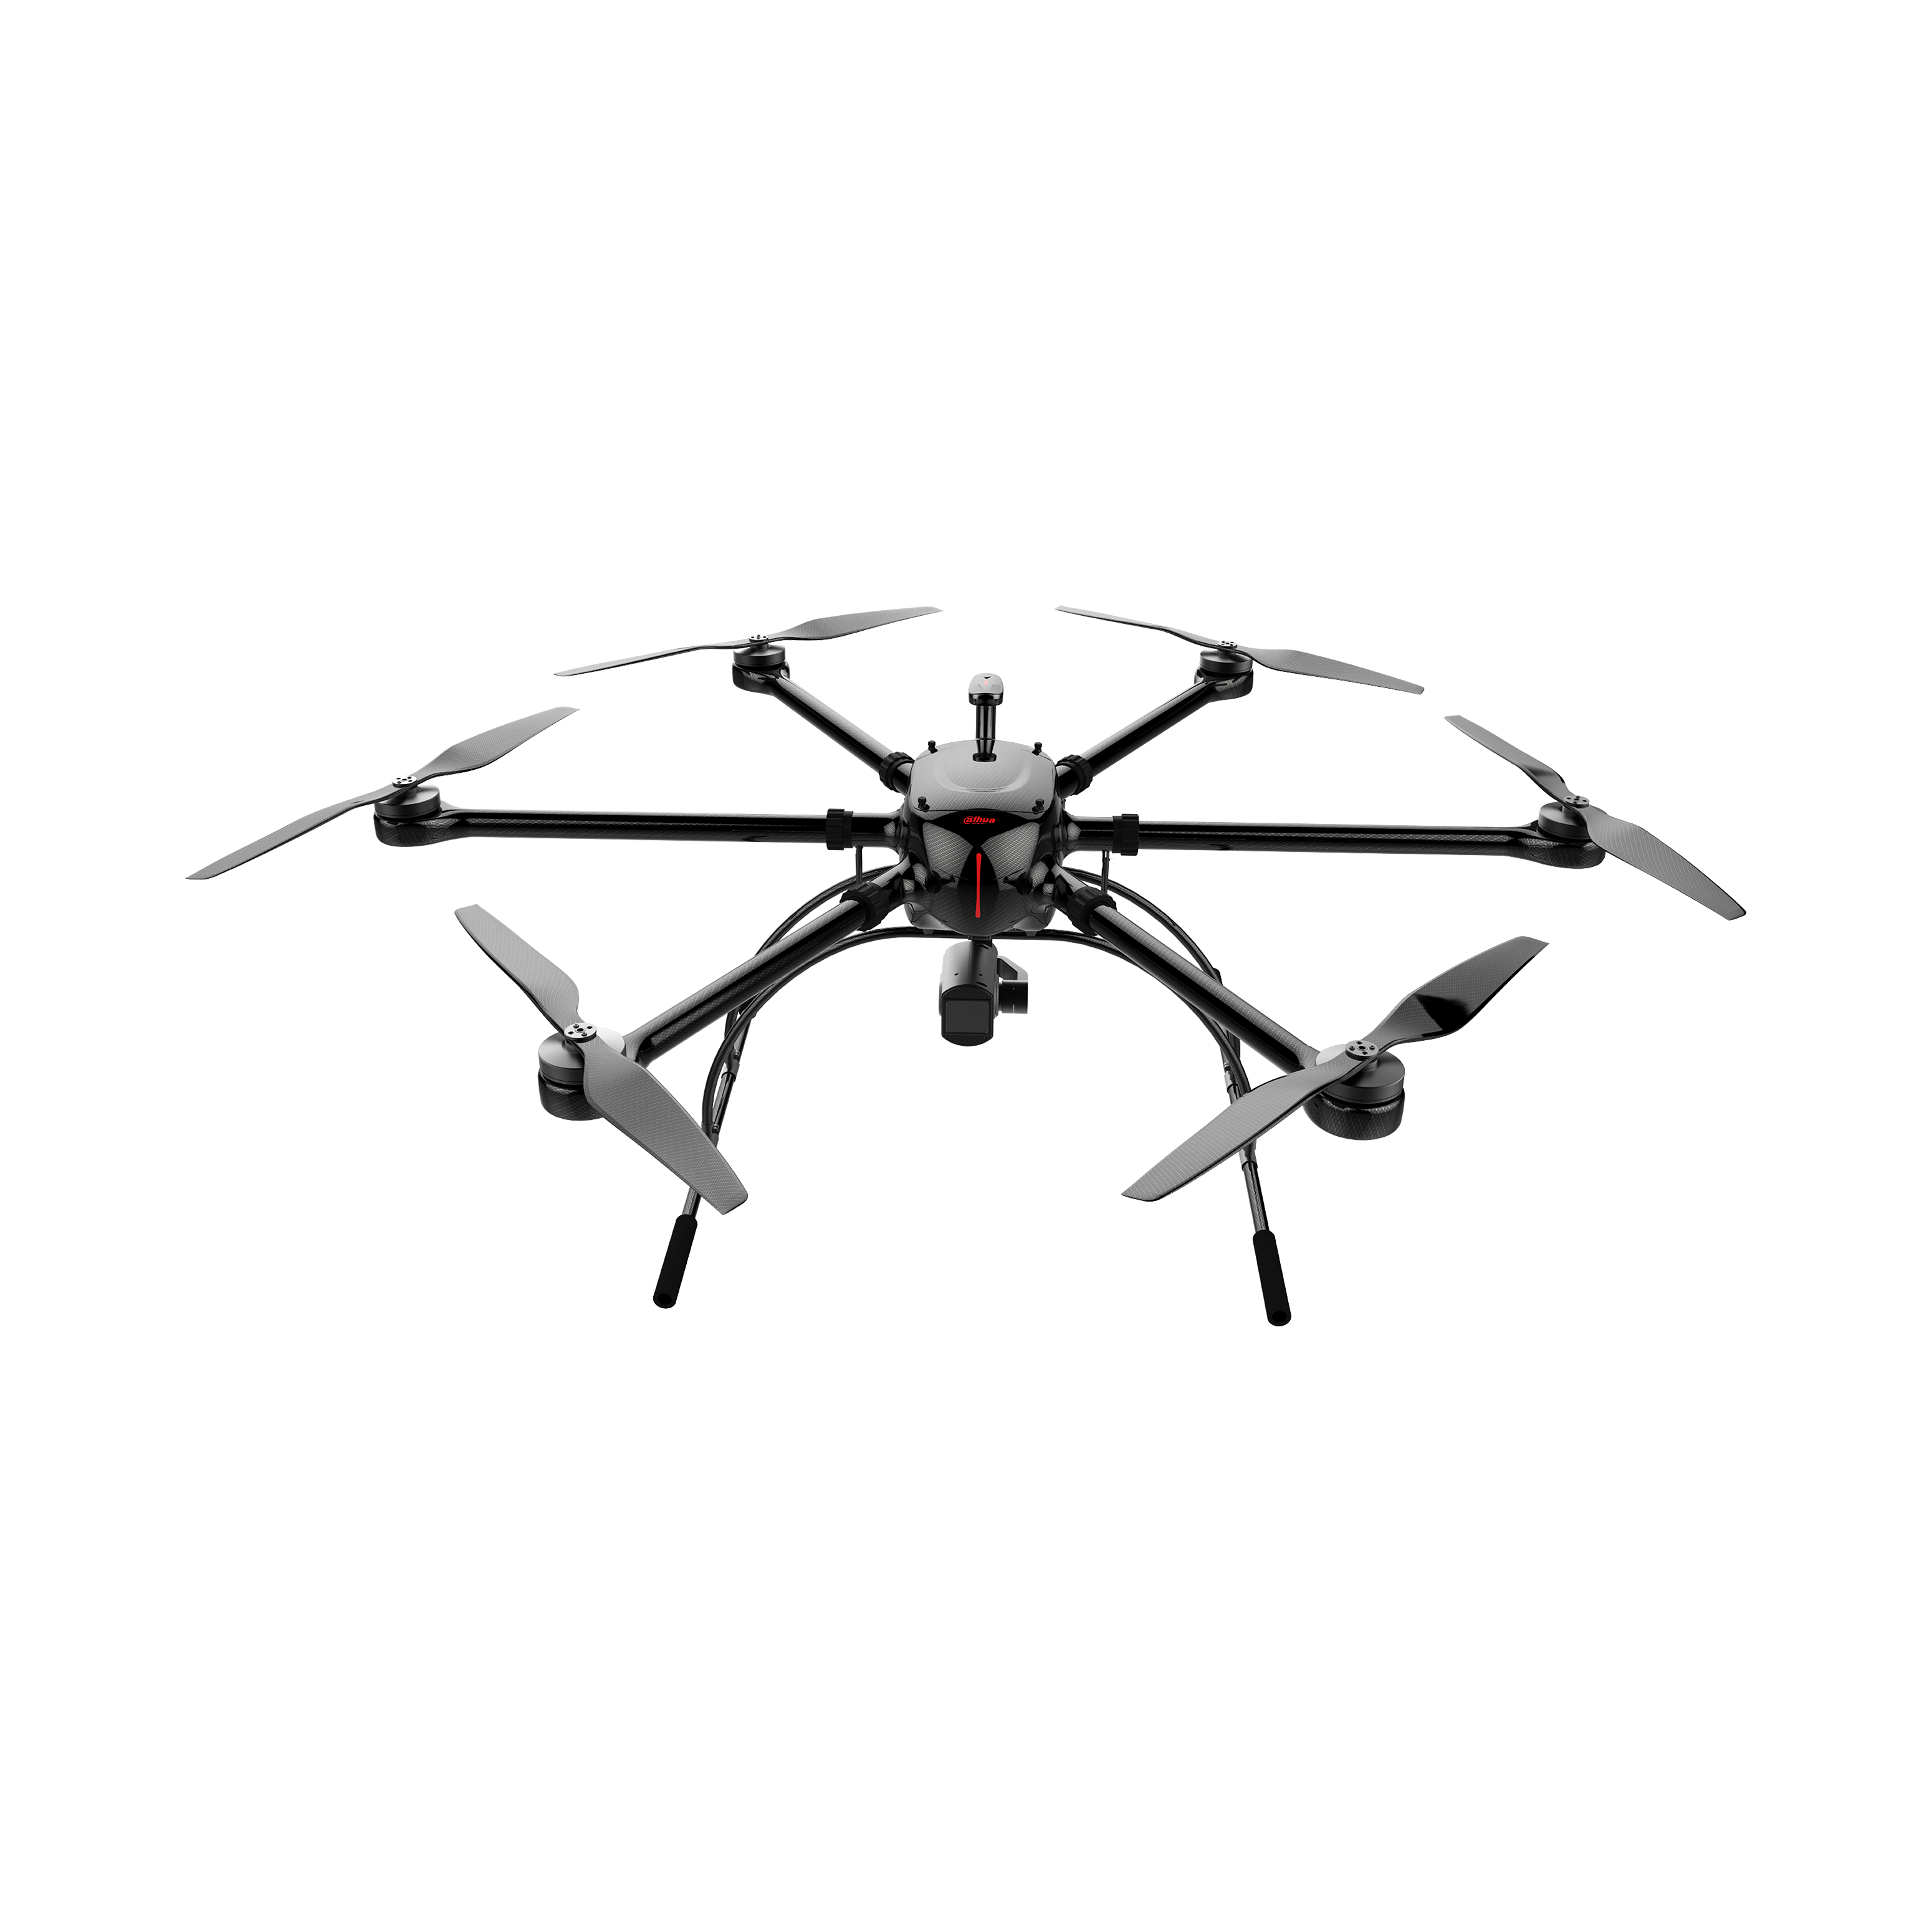 DAHUA X1550S A Hexrcopter Drone for Industry Application